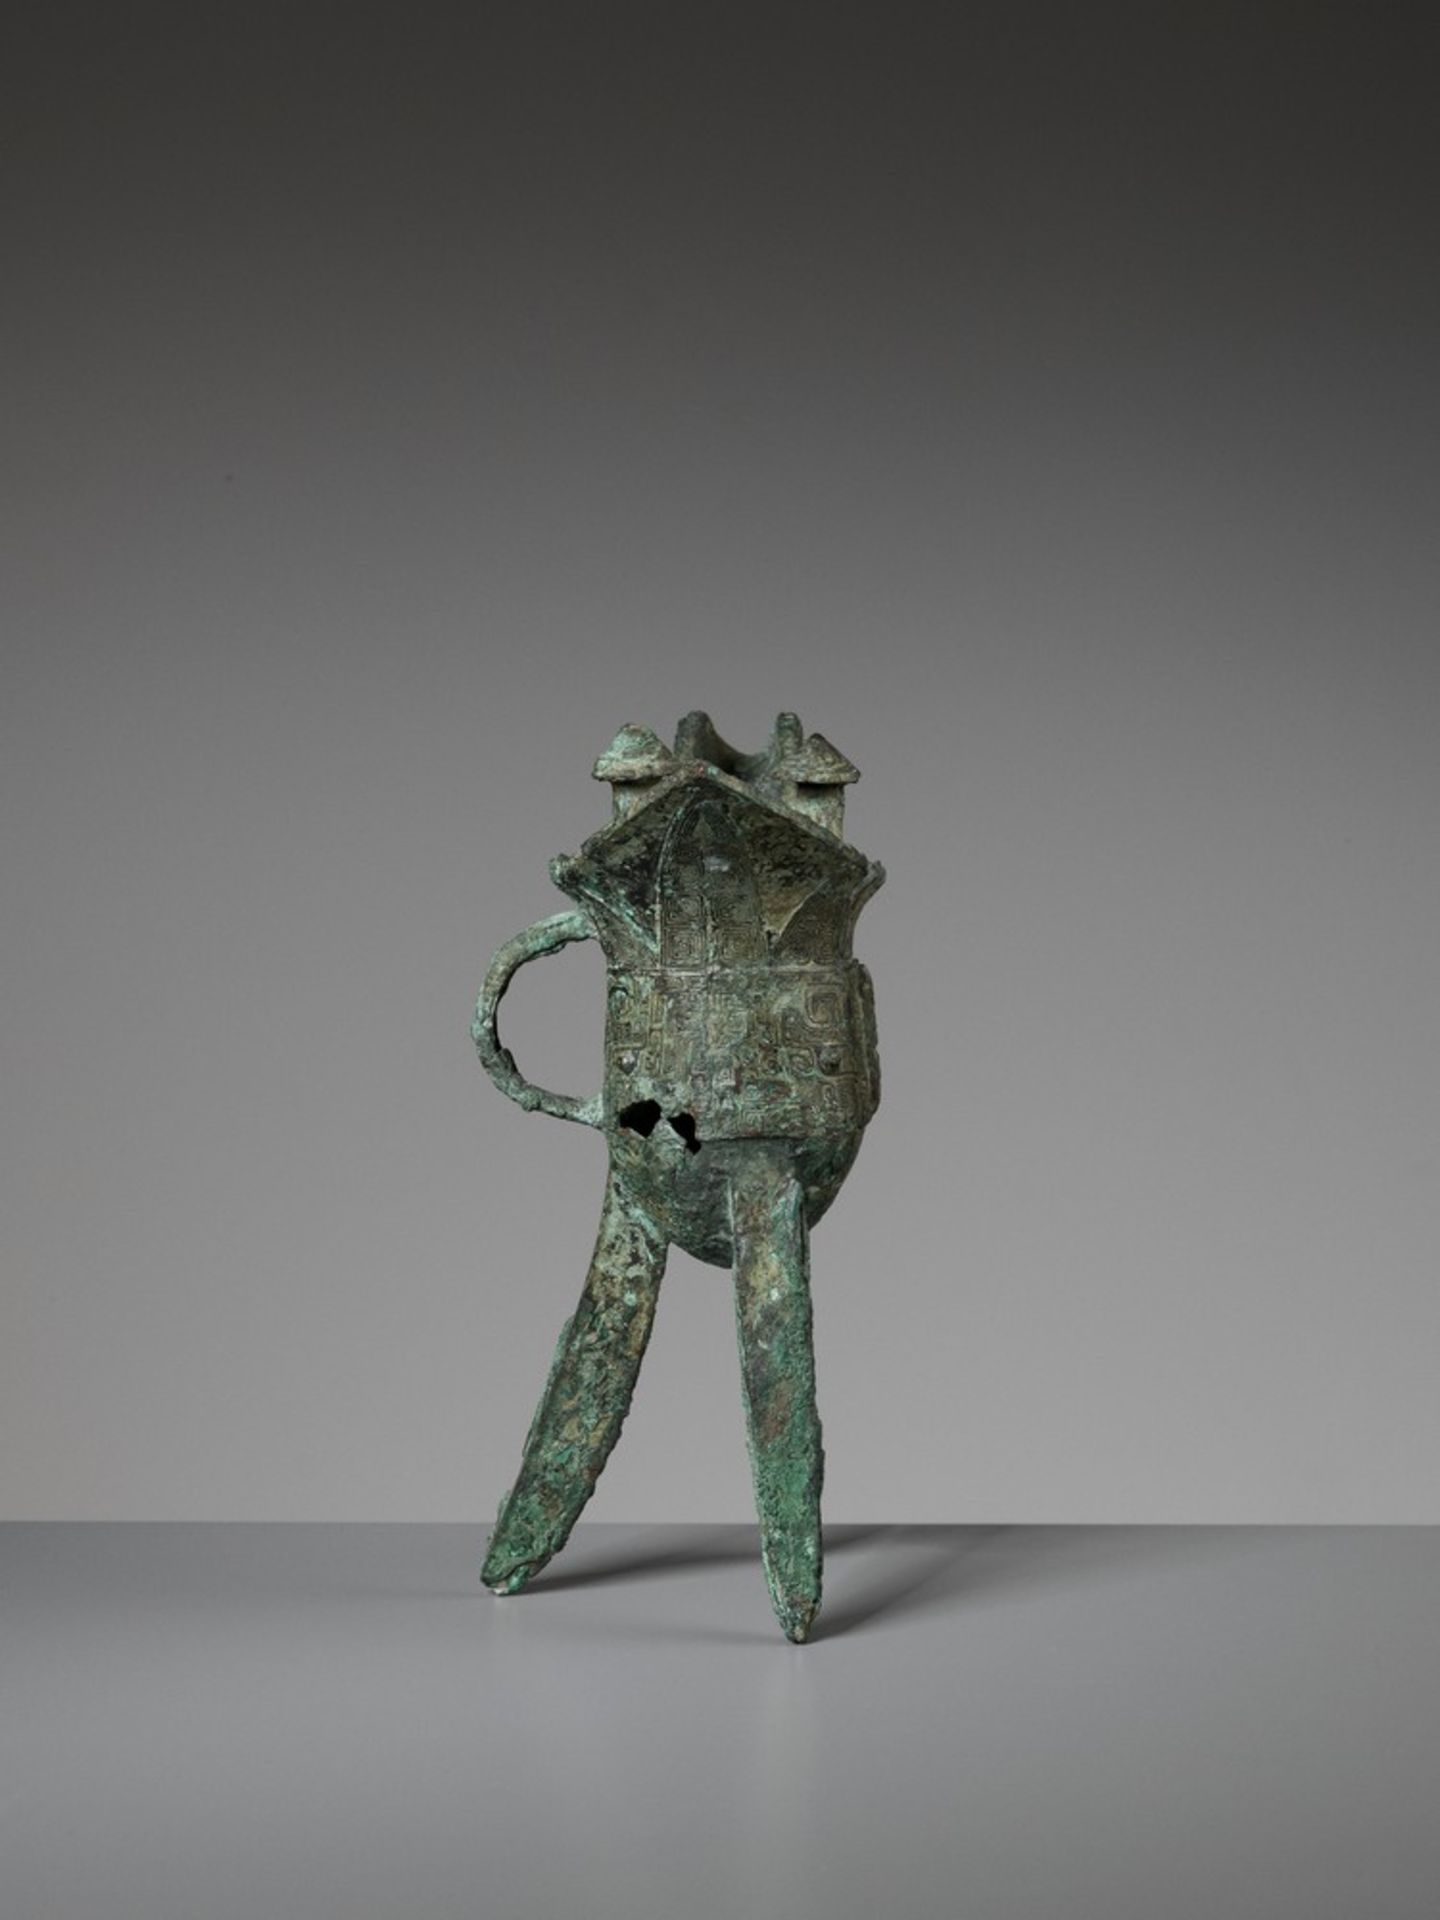 AN ARCHAIC BRONZE RITUAL WINE VESSEL, JUE, SHANG DYNASTY - Image 10 of 15